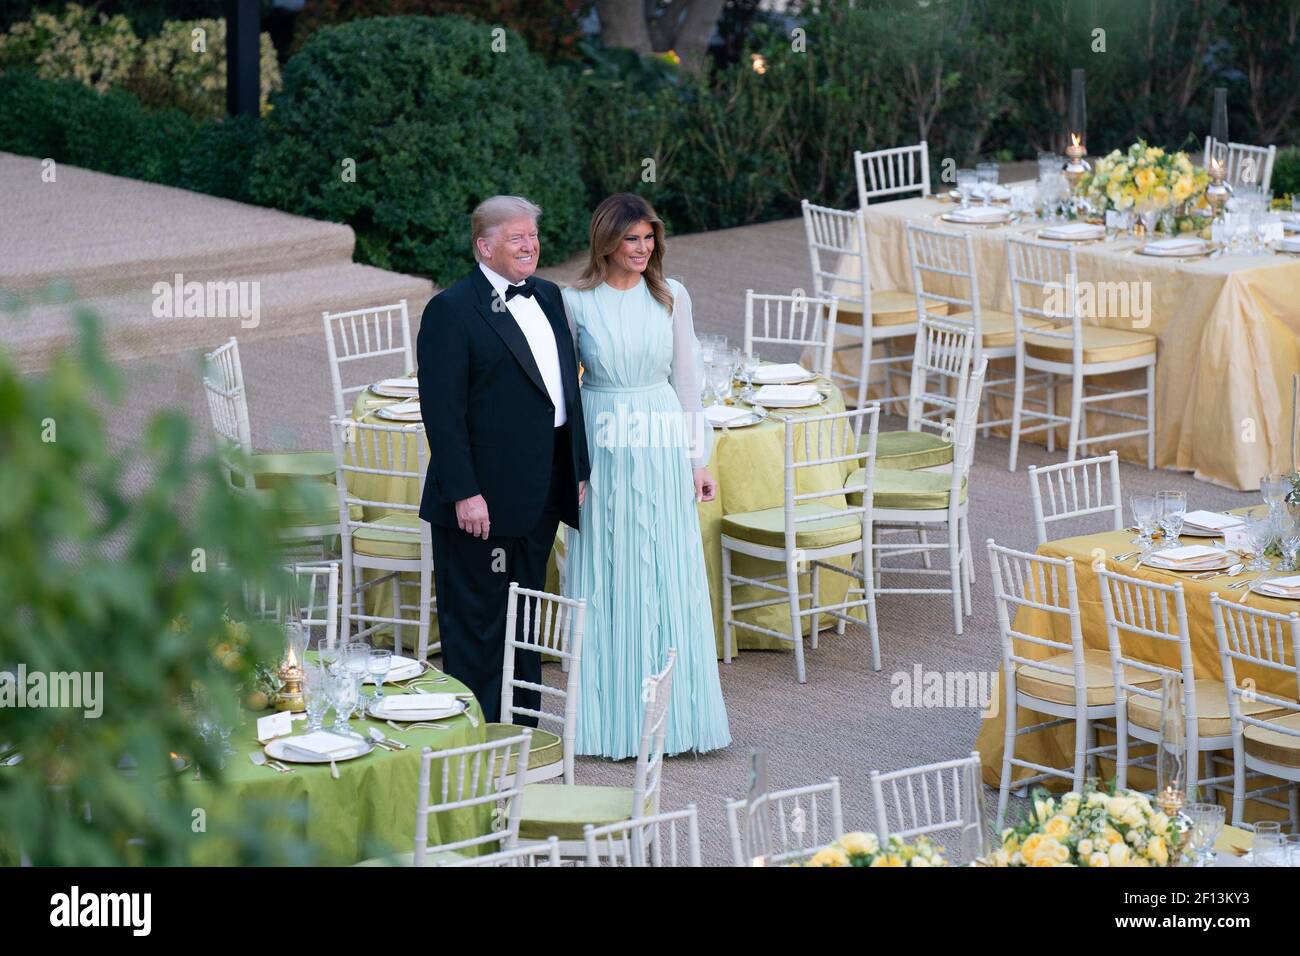 President Donald Trump and First Lady Melania Trump pose for a photo prior to the State Dinner in honor of the Australian Prime Minister Scott Morrison and his wife Mrs. Jenny Morrison Friday Sept. 20 2019 in the Rose Garden of the White House. Stock Photo